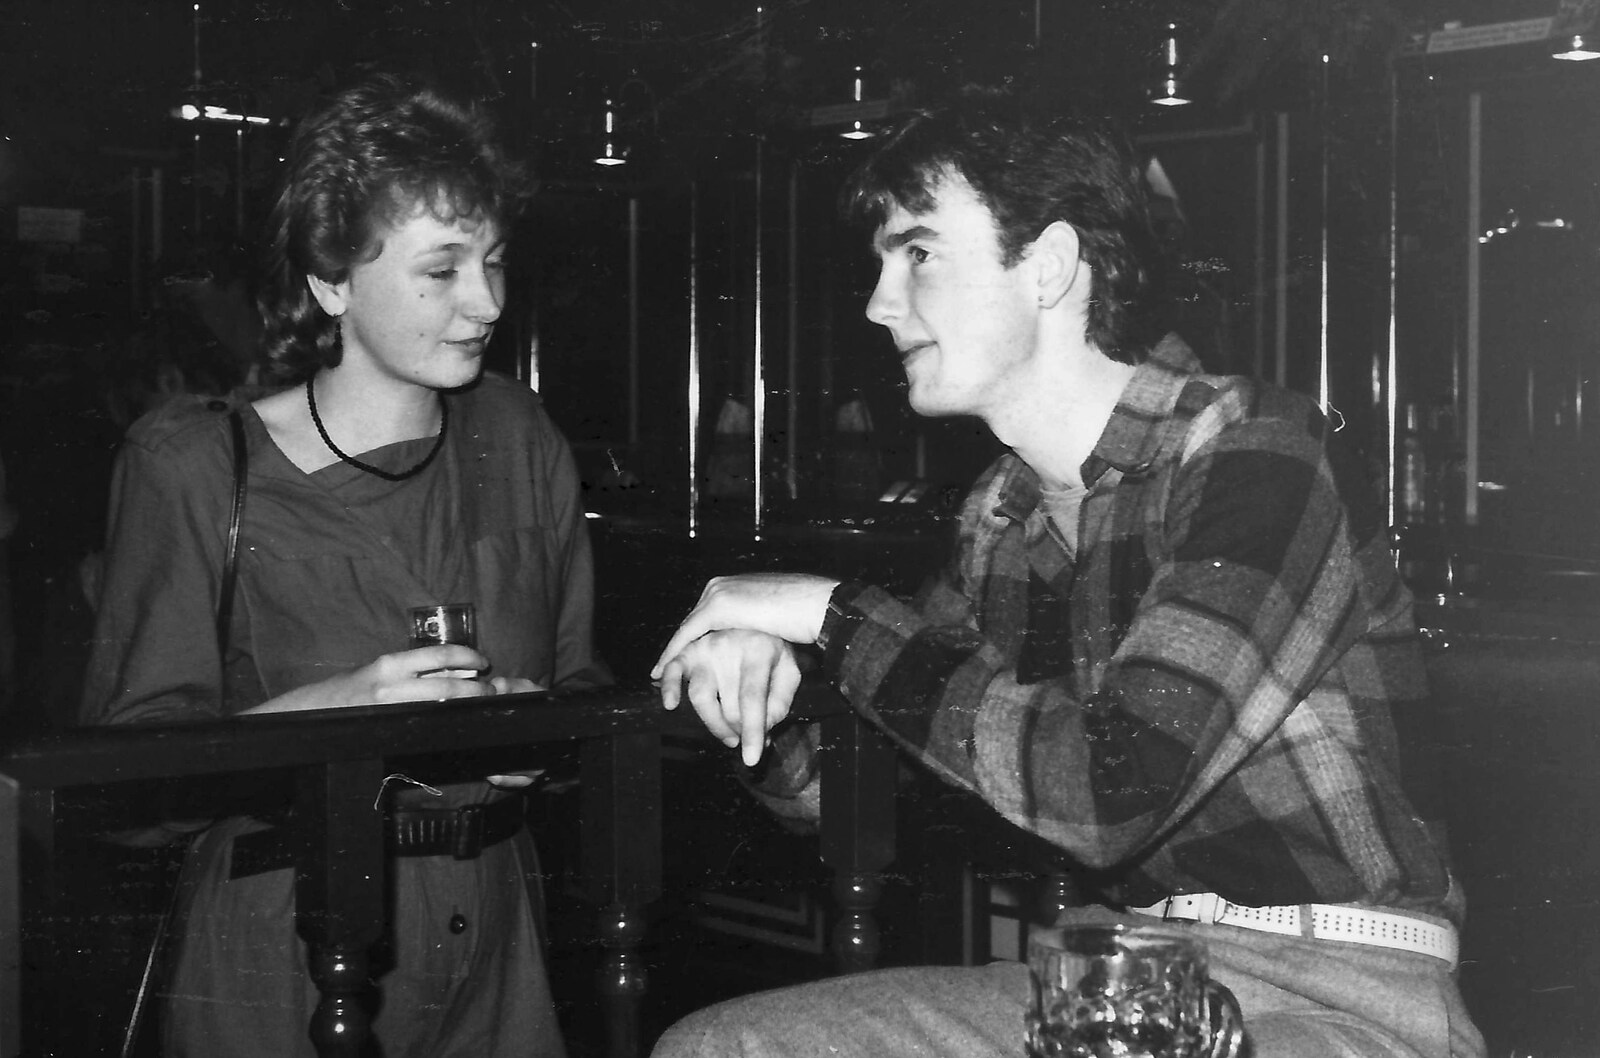 John Stuart chats to someone in Snobs from Uni: The First Year in Black and White, Plymouth Polytechnic, Devon - 8th April 1986